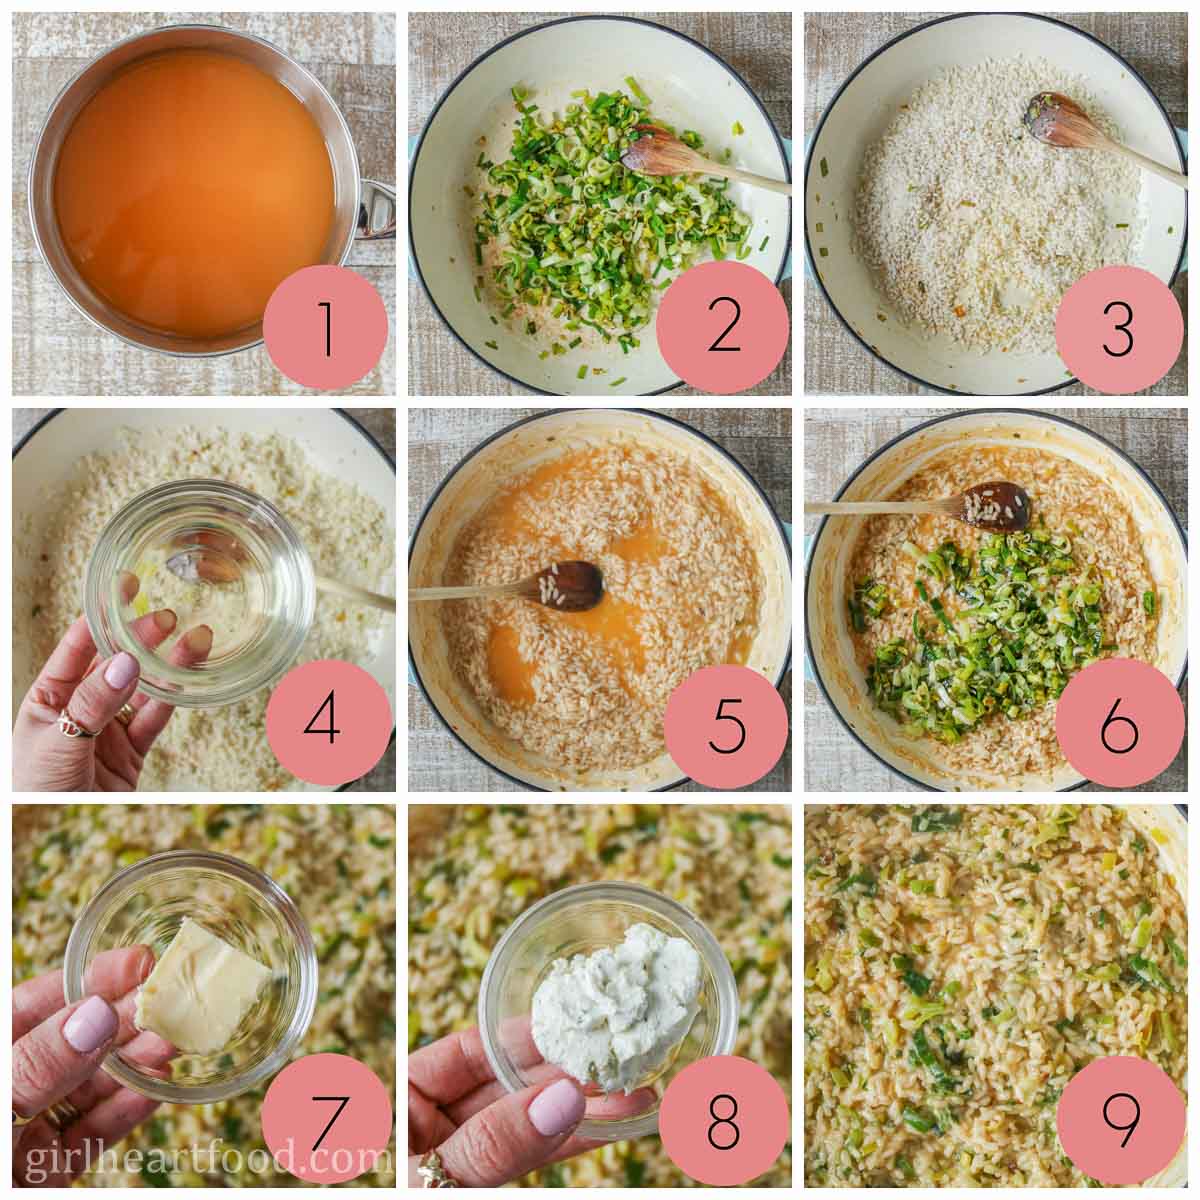 Collage of steps to make leek risotto.